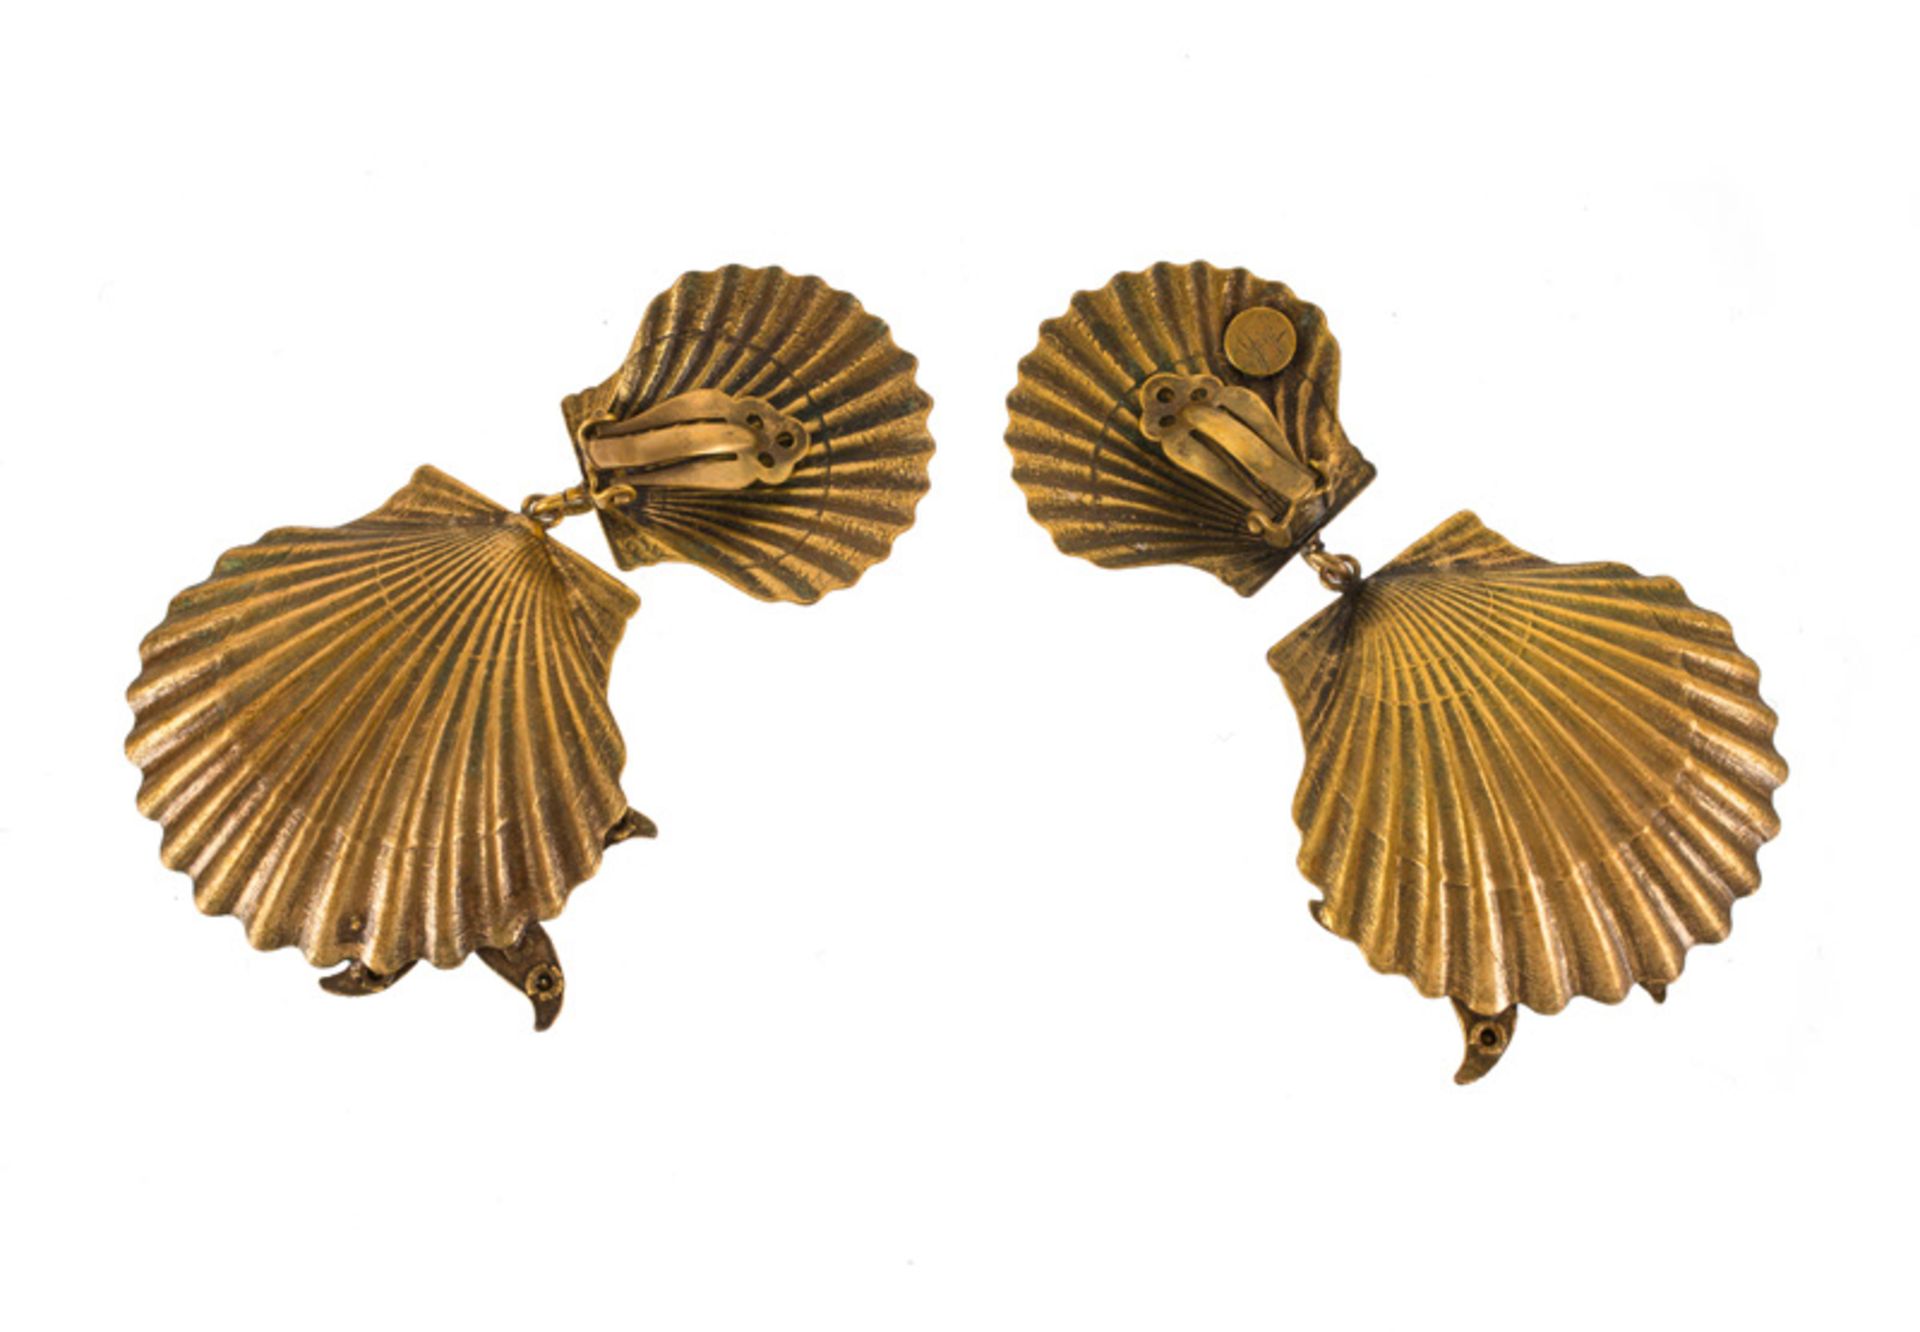 A Joseff Hollywood goldtone pair of earclips, depicting a shell and a starfish, set with rhinestones - Image 2 of 2